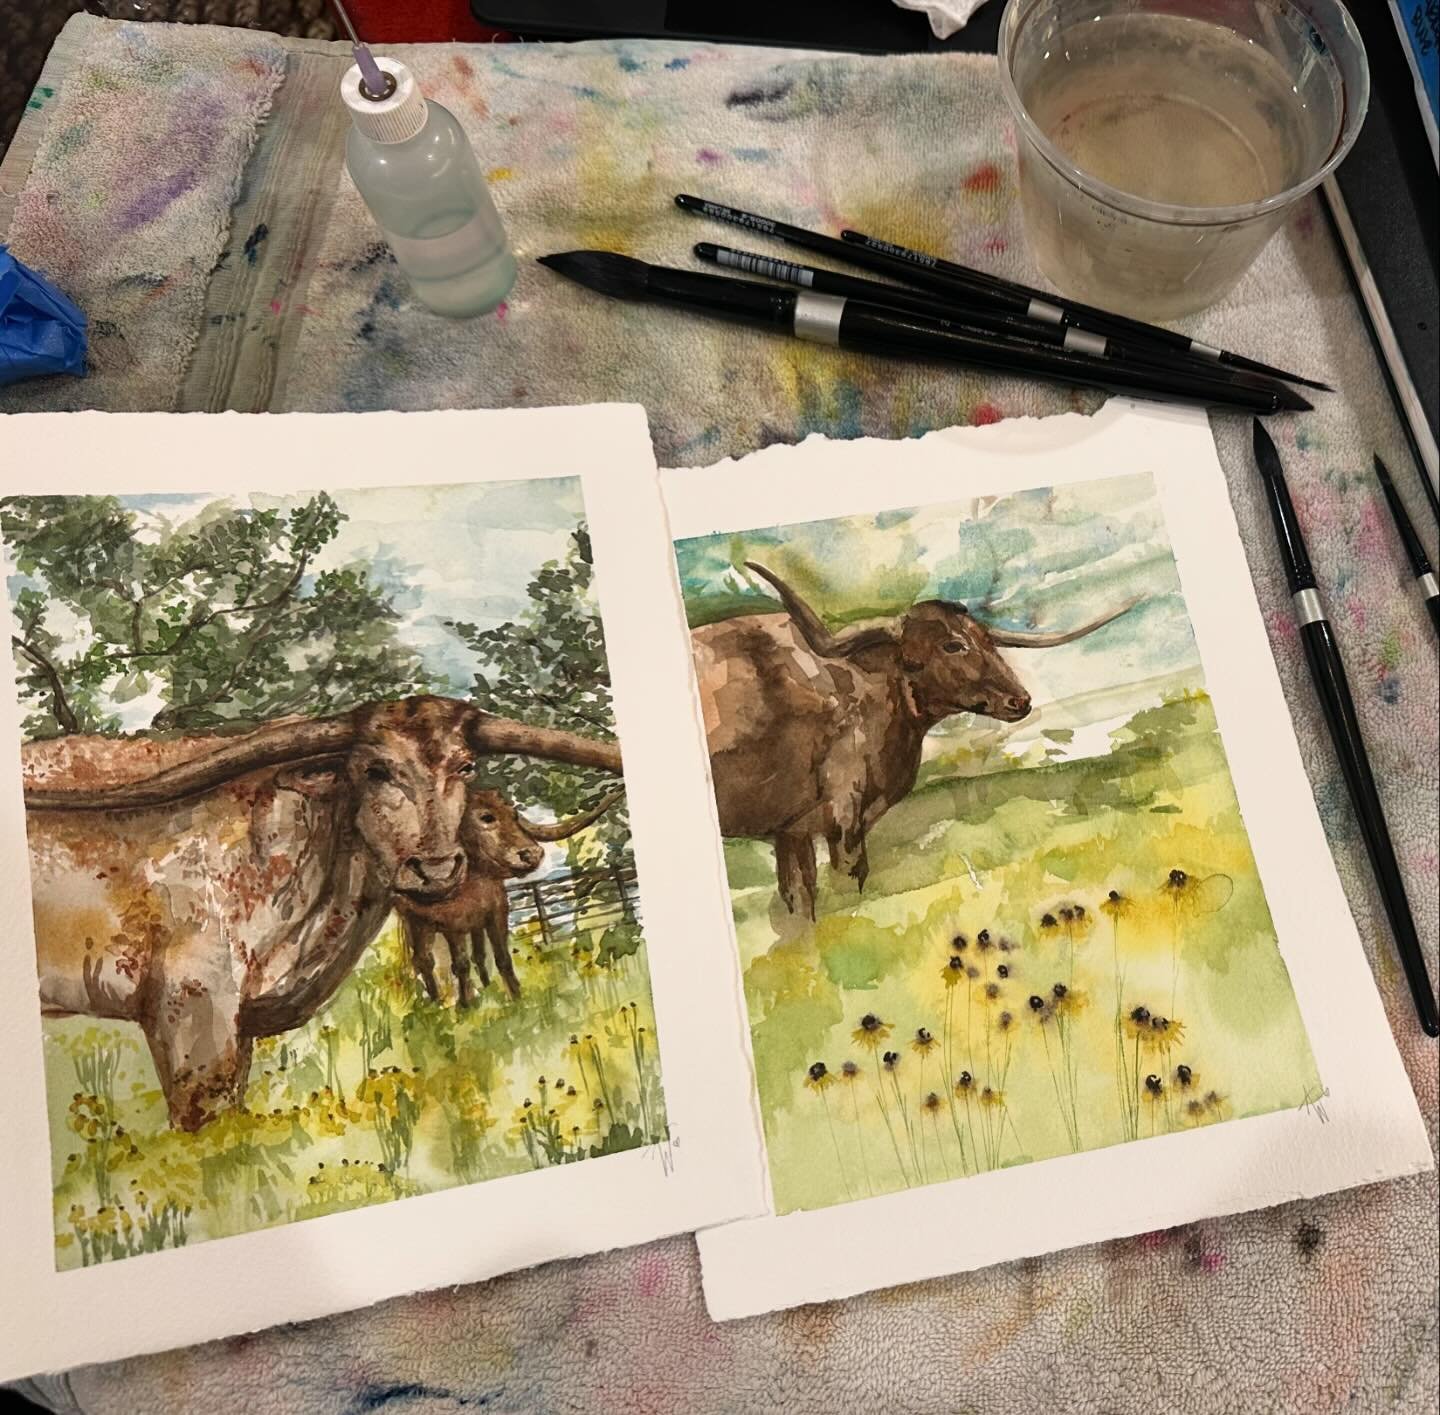 Longhorn day&hellip; done! Prep for the mentor day with &ldquo;student art day&rdquo;tomorrow! @highlandlakescreativearts 🤠 #pleinairpainting #watercolorpainting #watercolors